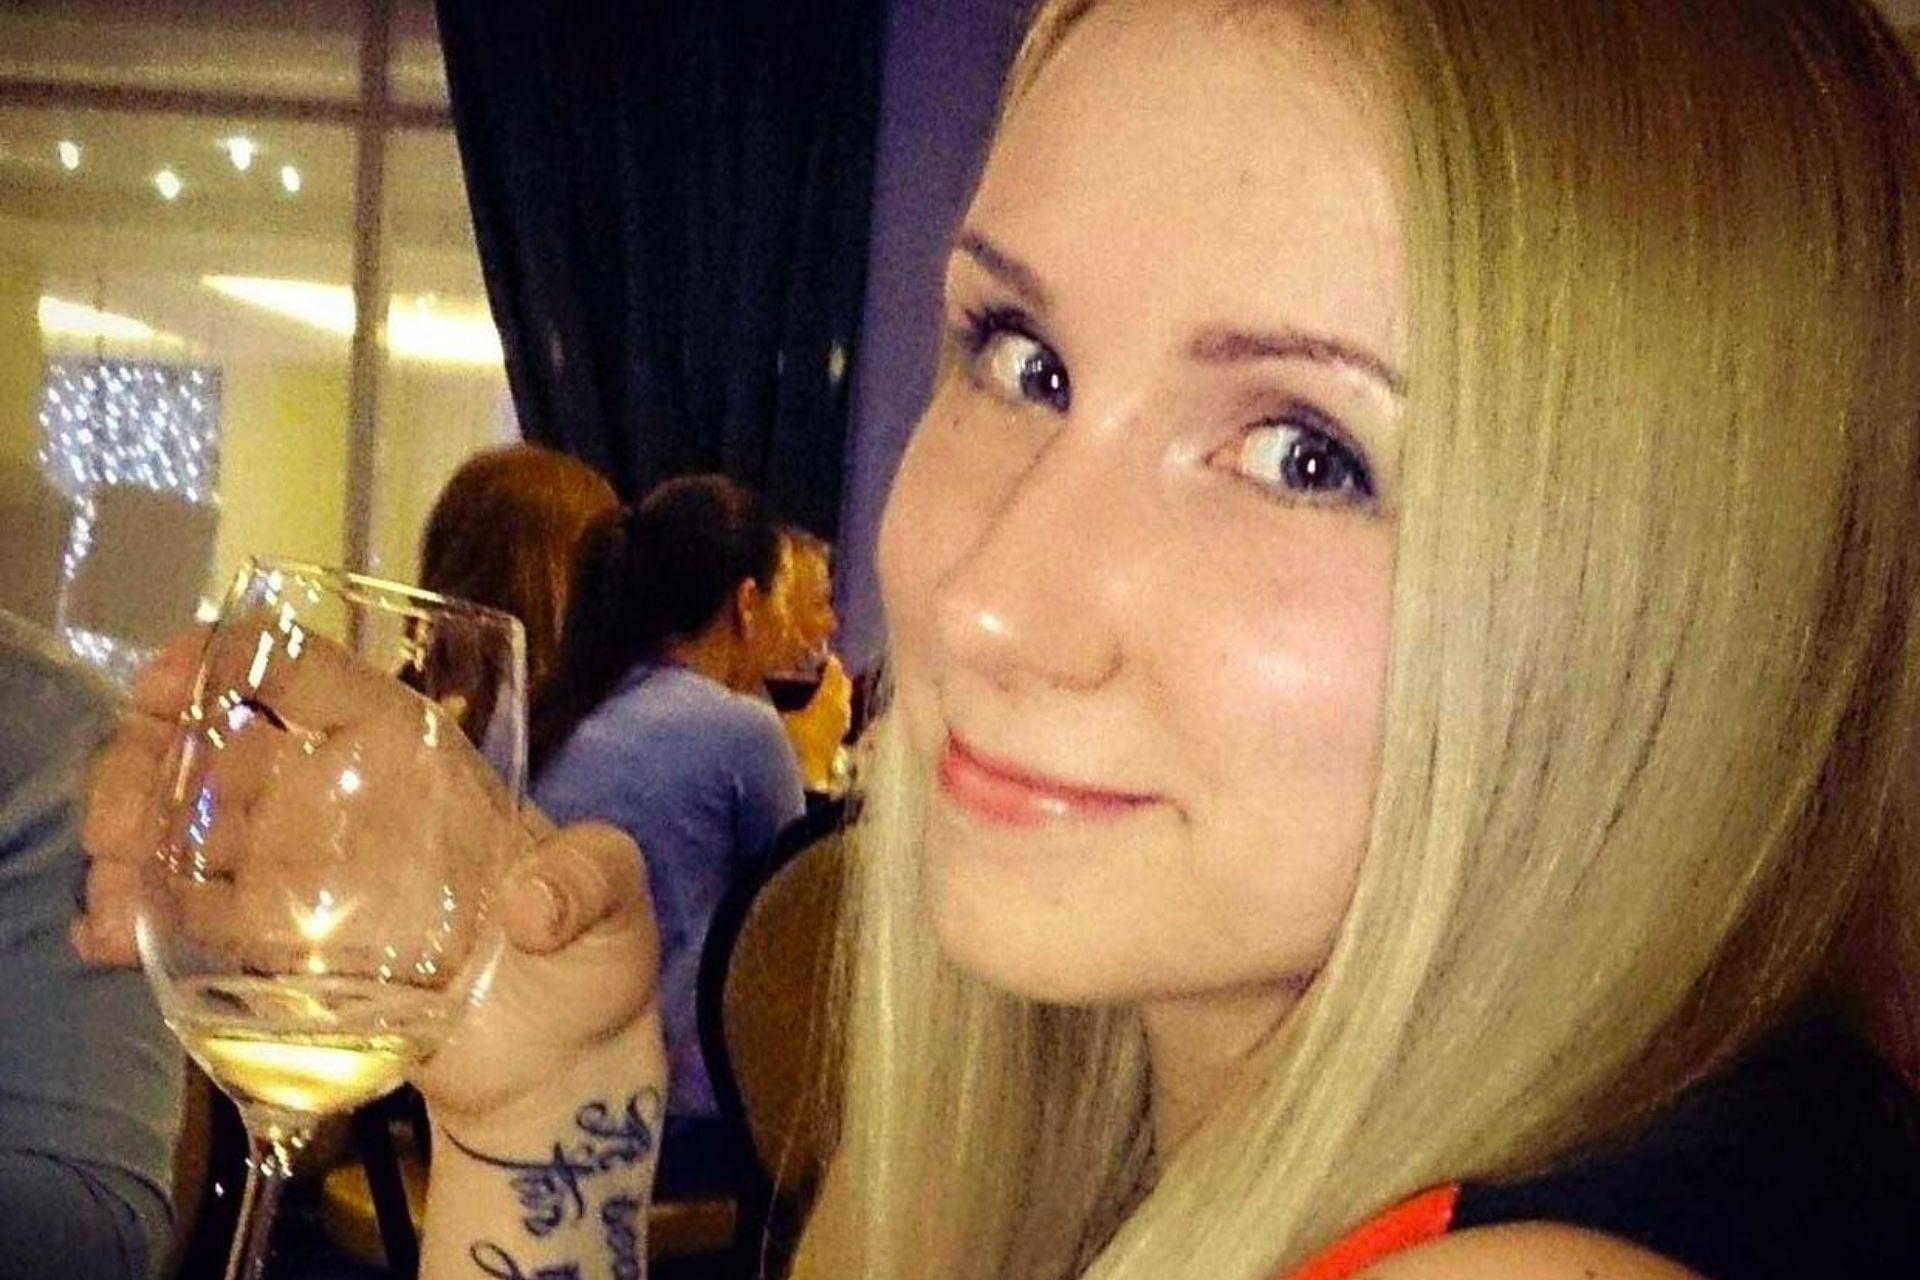 26-year-old woman from Moscow, Anna Repkina, was caught in a love-triangle that resulted in her death in 2017. 